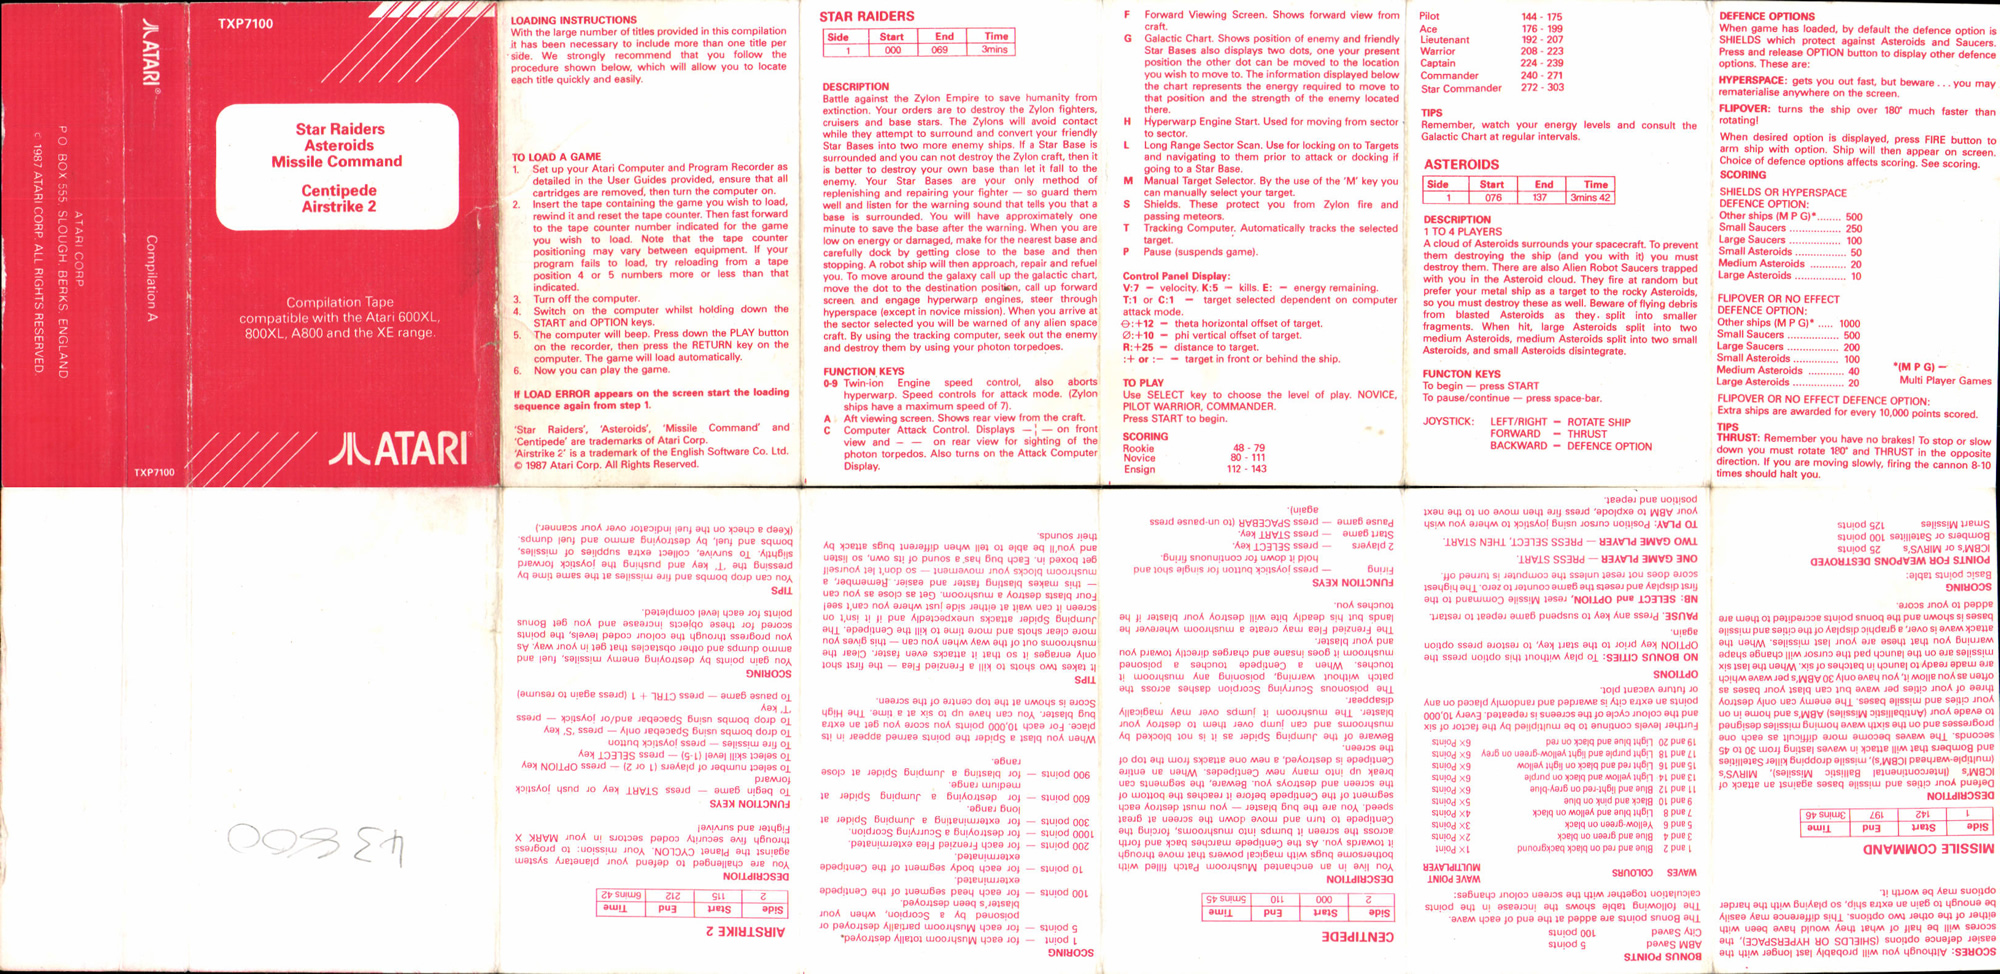 Compilation A/Compilation_A_TXP7100_cover.jpg